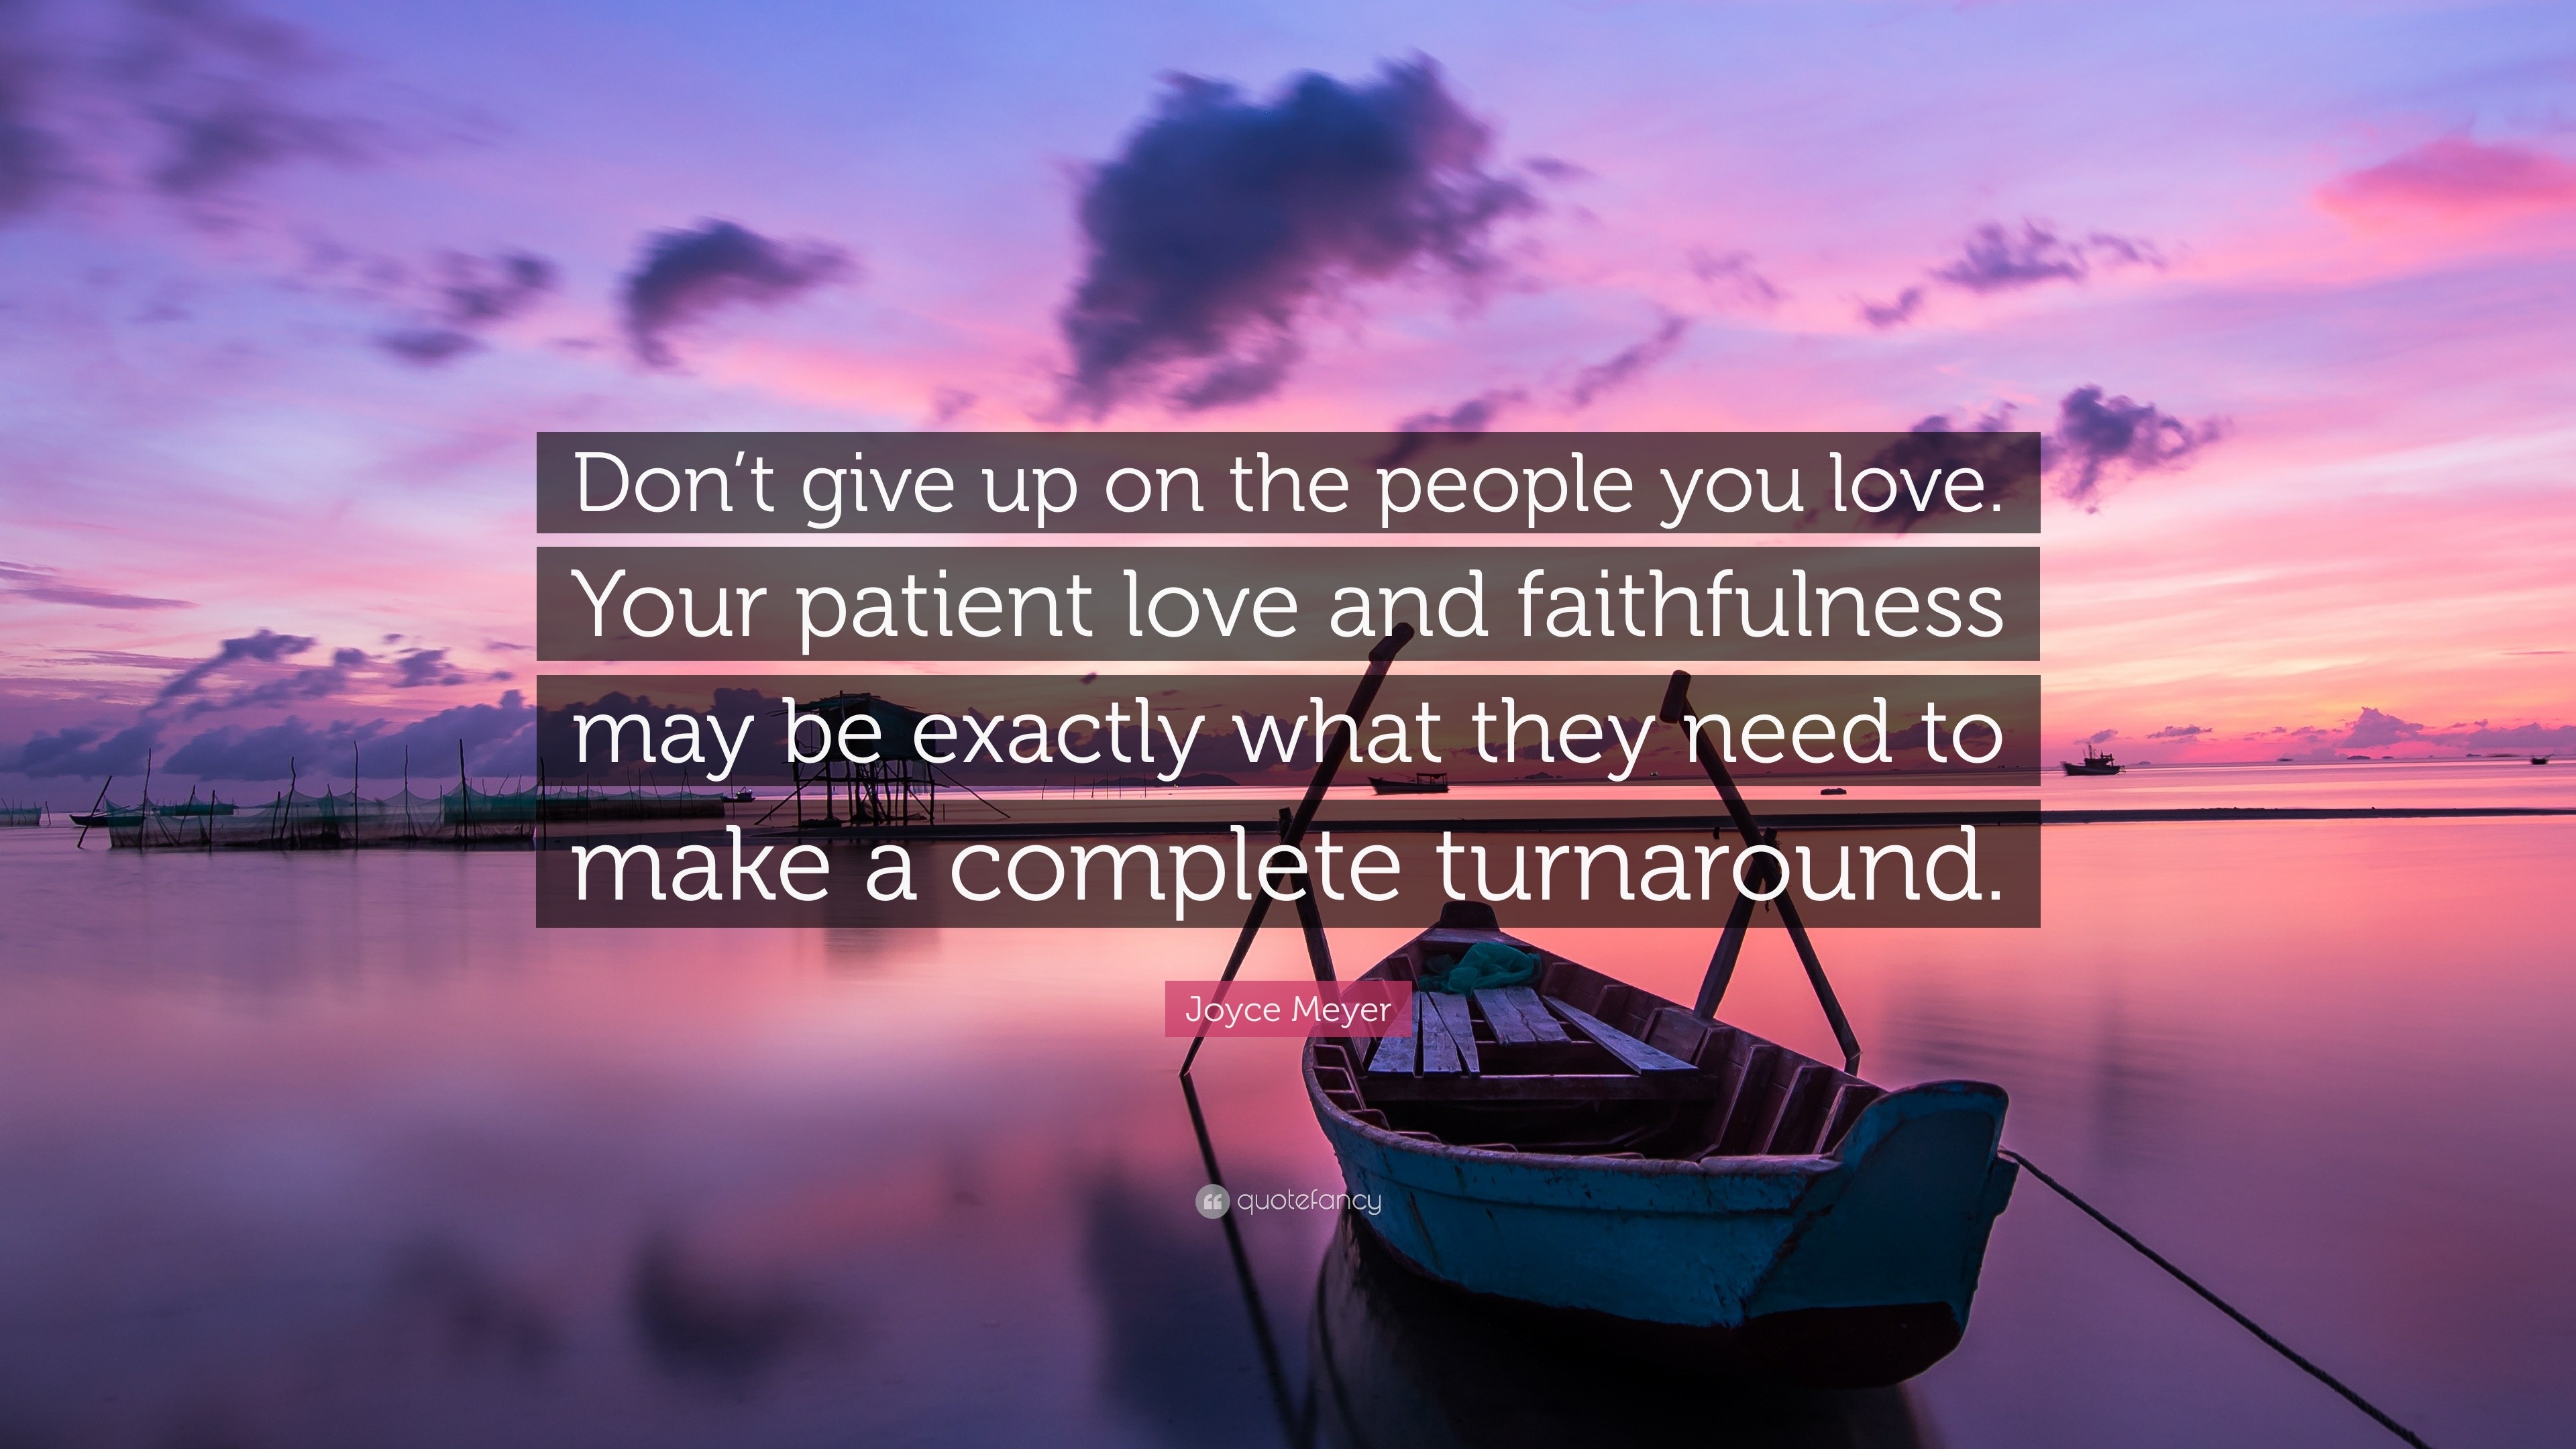 Joyce Meyer Quote “Don’t give up on the people you love